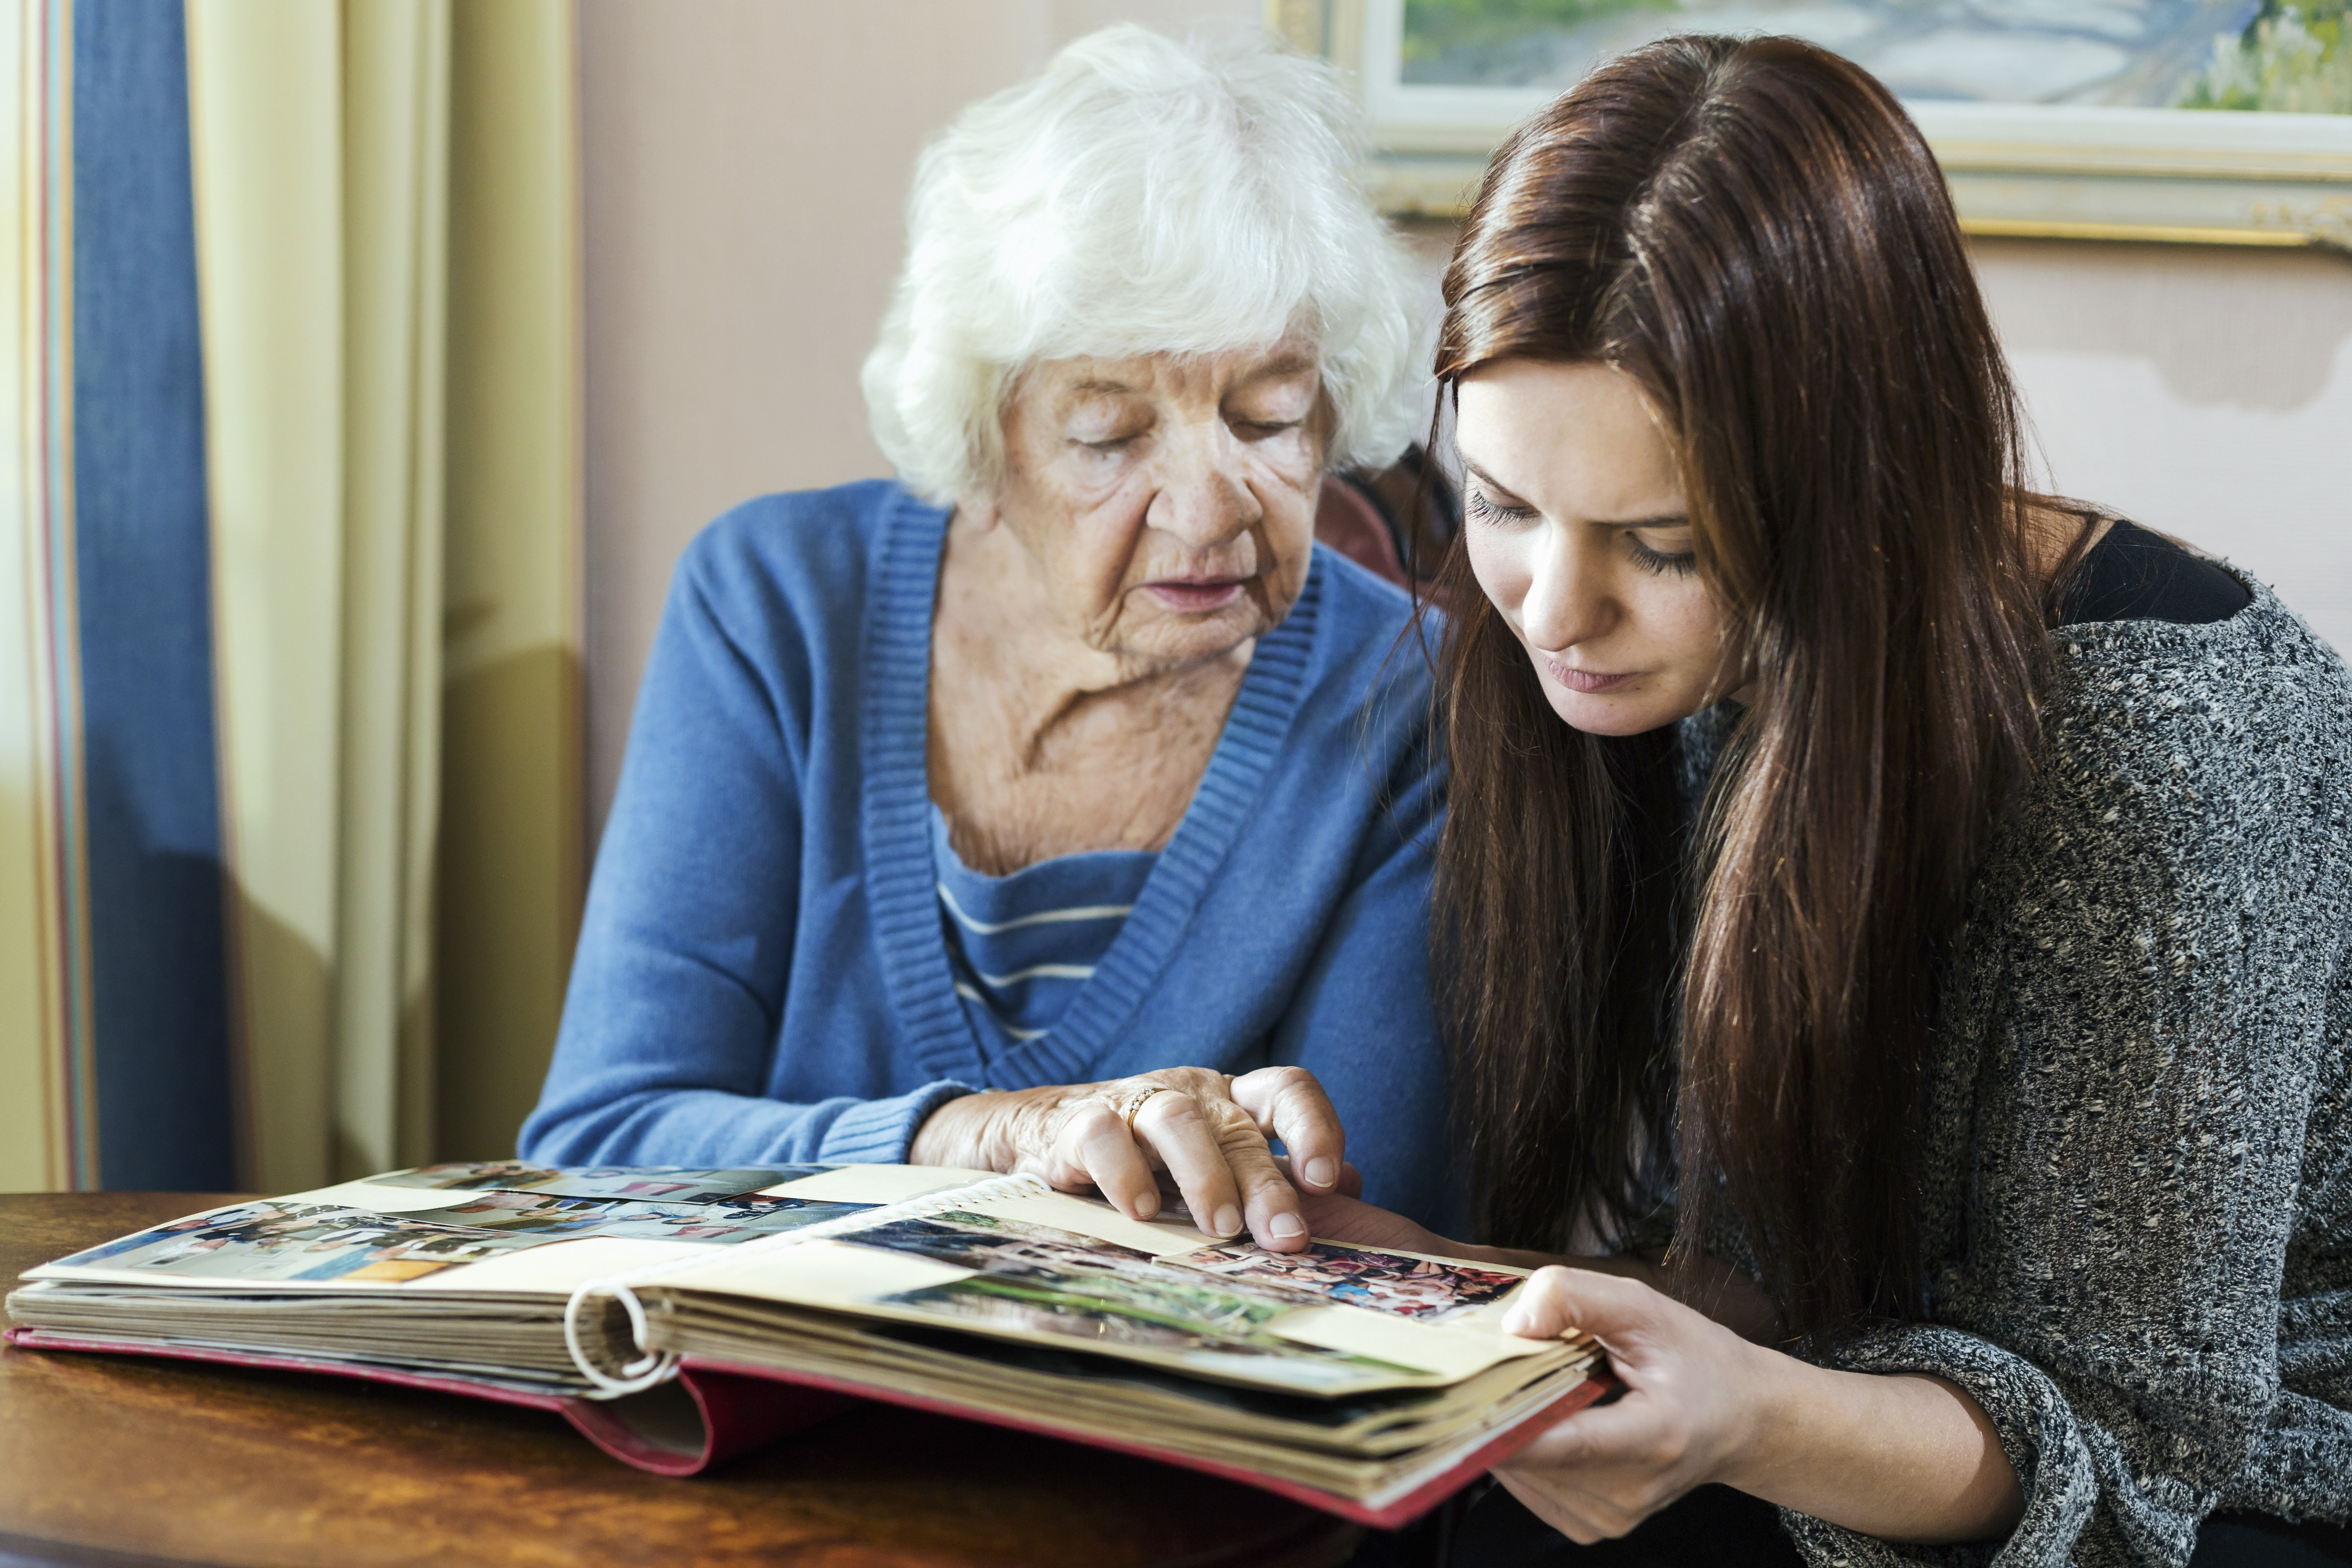 Grandmother and granddaughter looking at photo album in house | Source: Getty Images